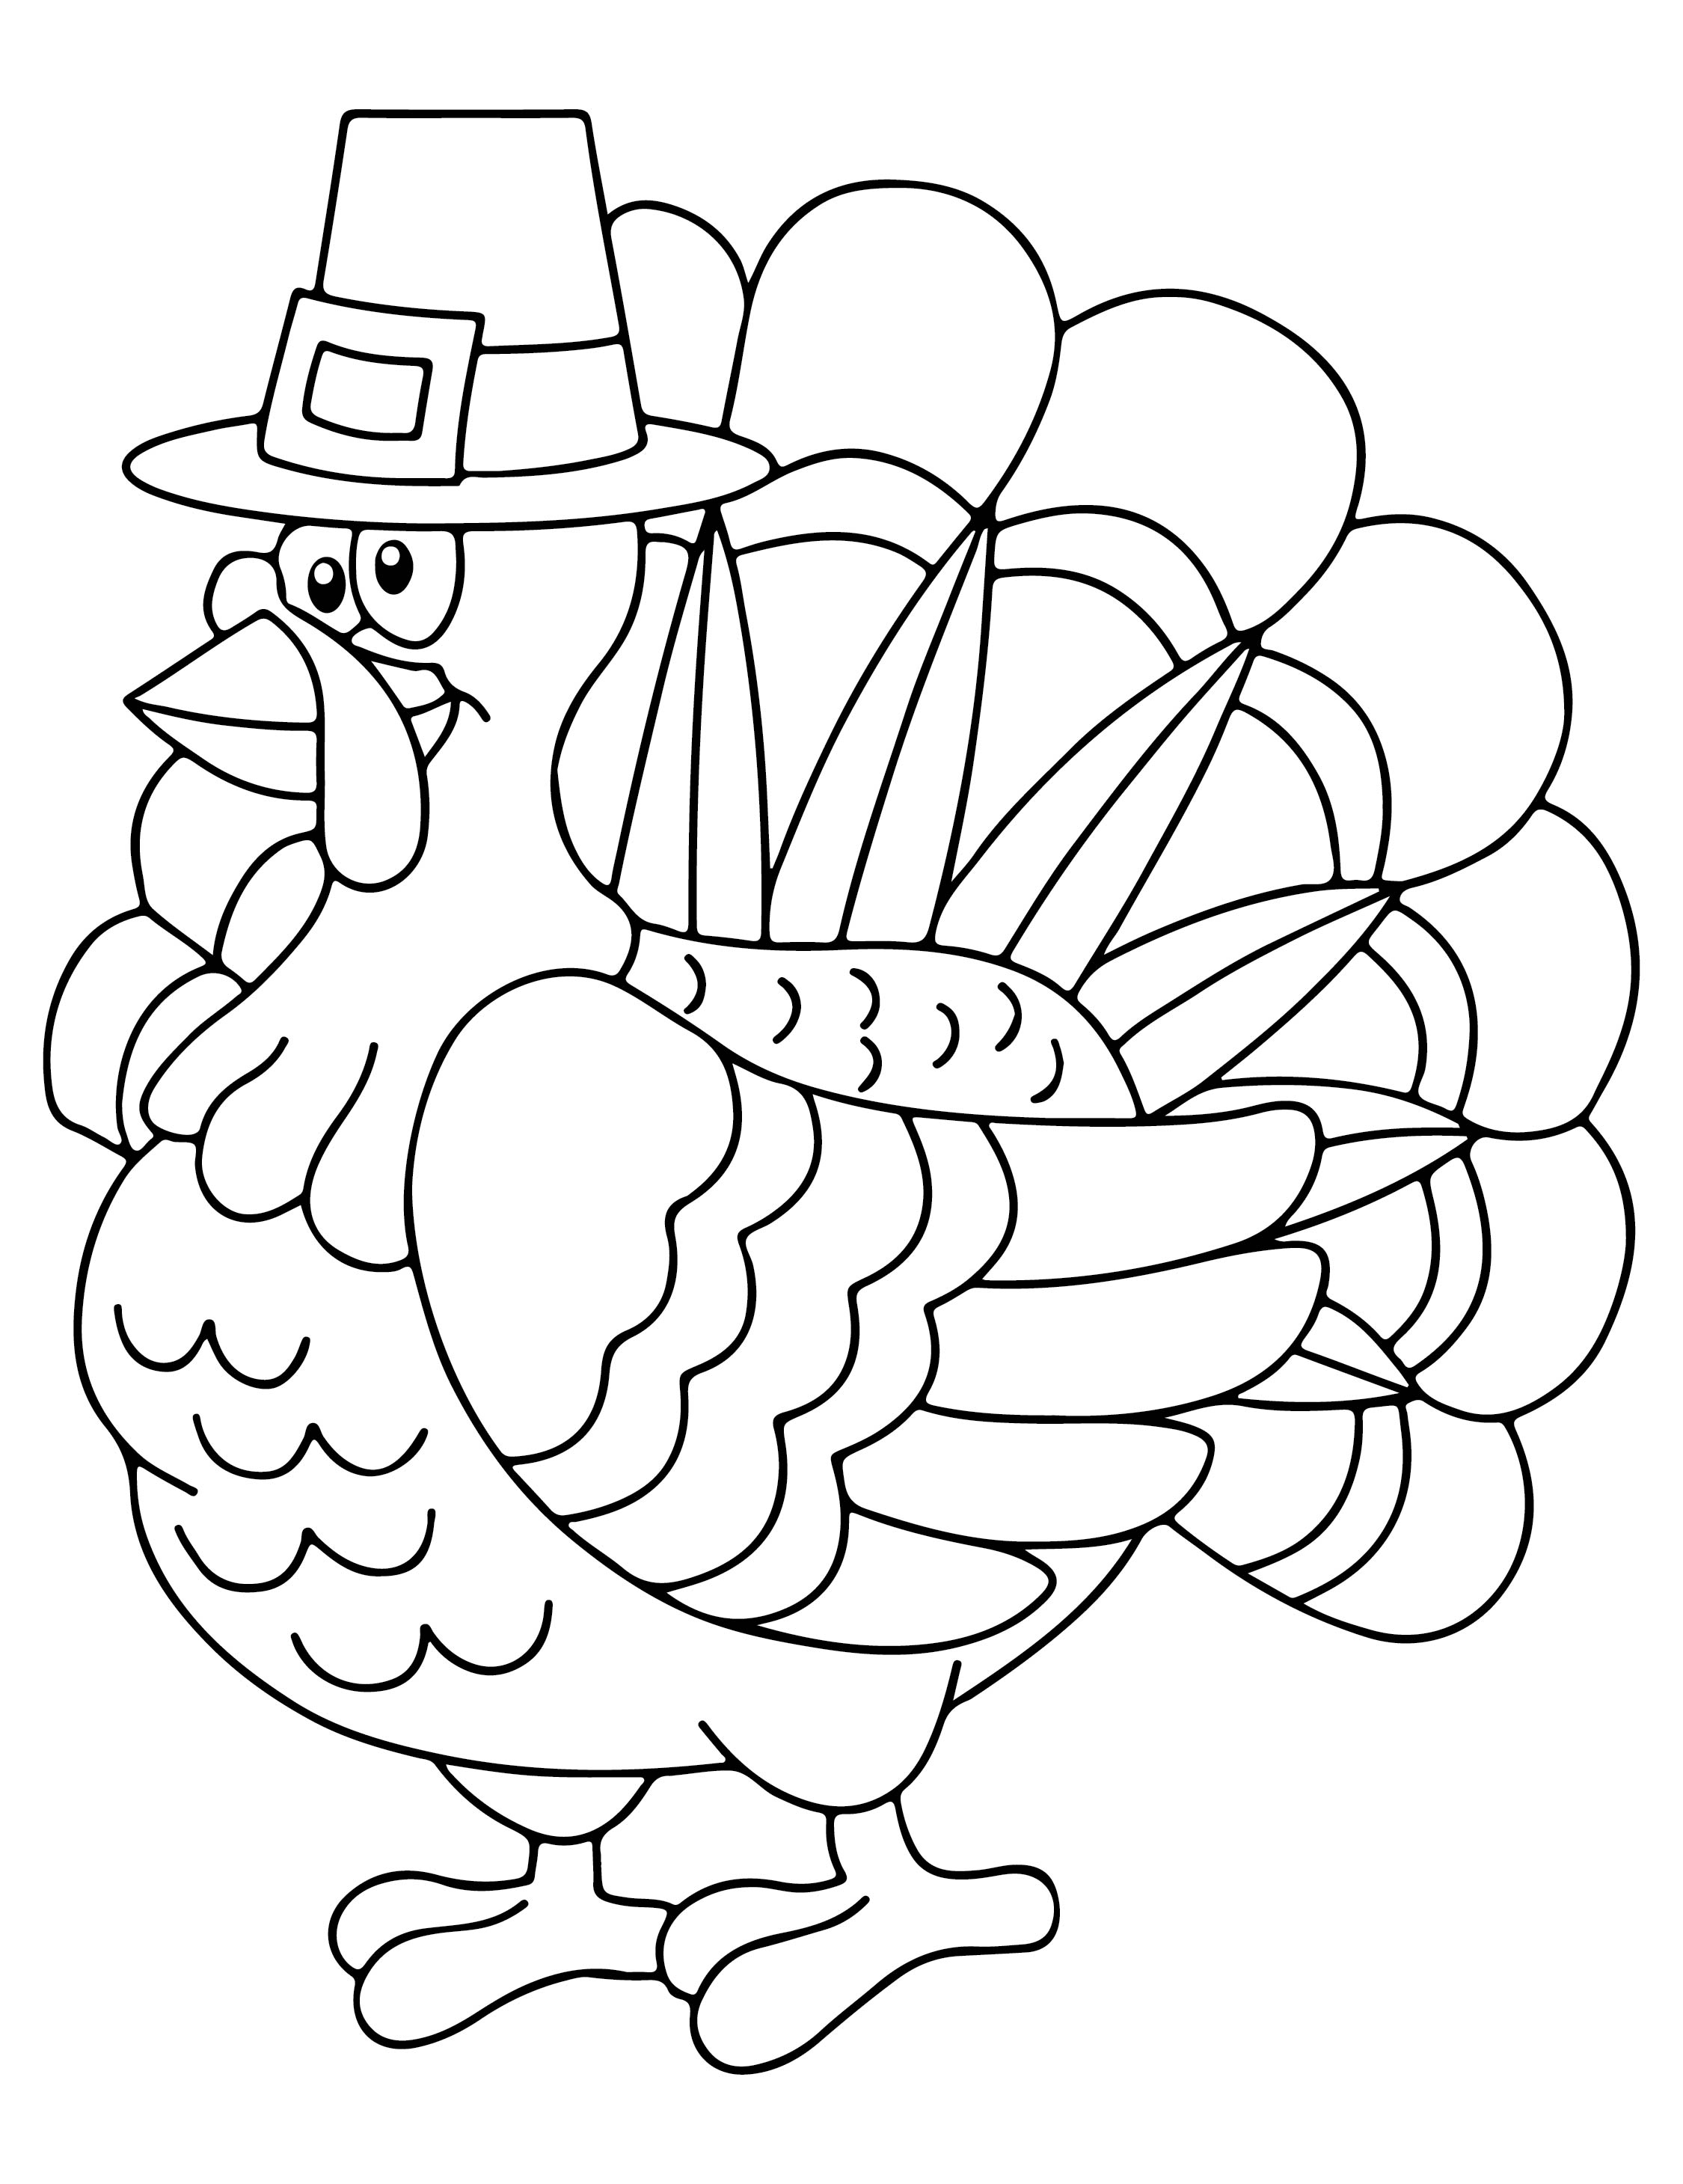 Printable Thanksgiving Coloring Activity Pages